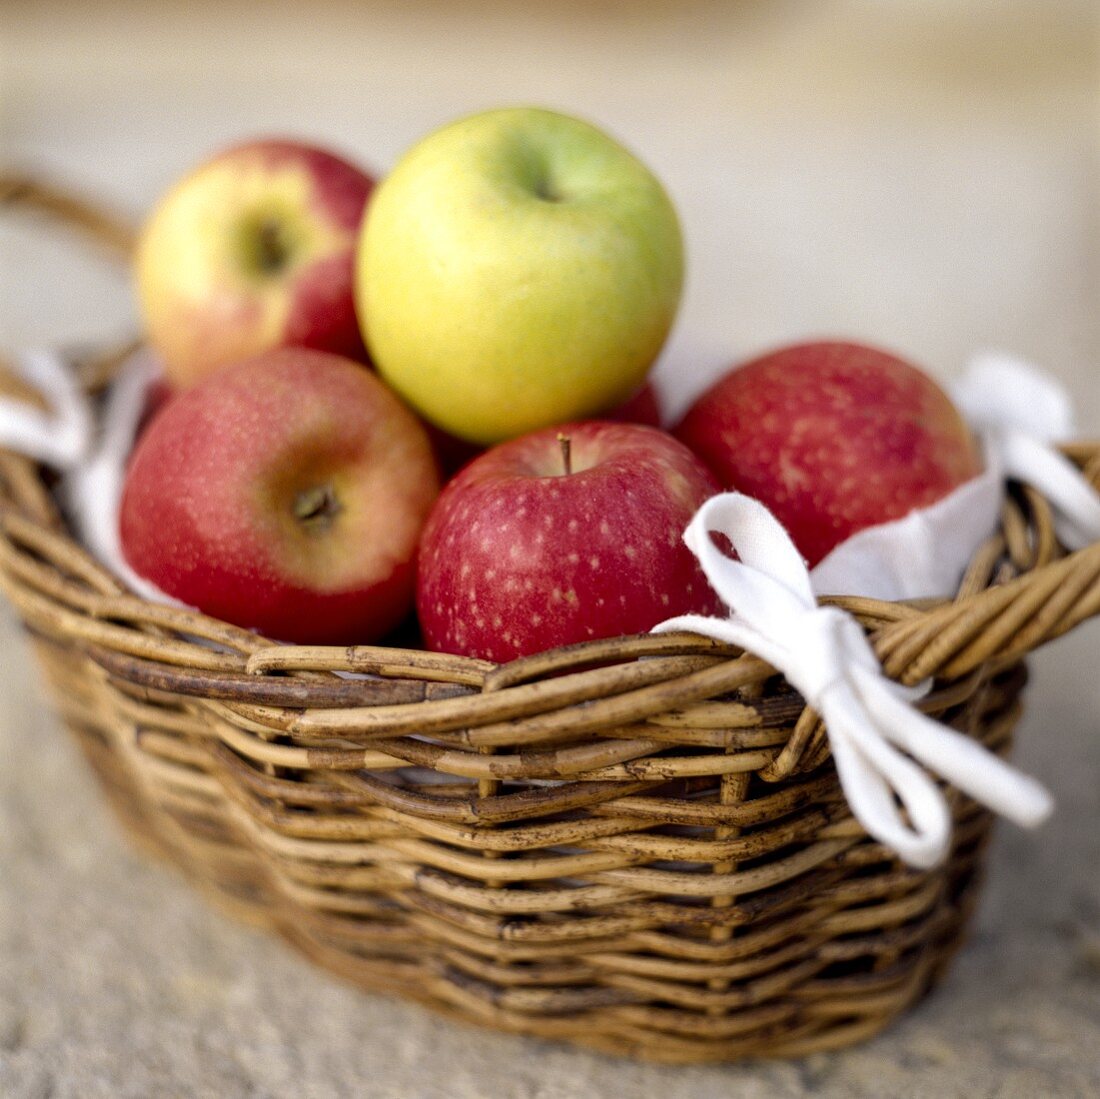 A basket of red and green apples